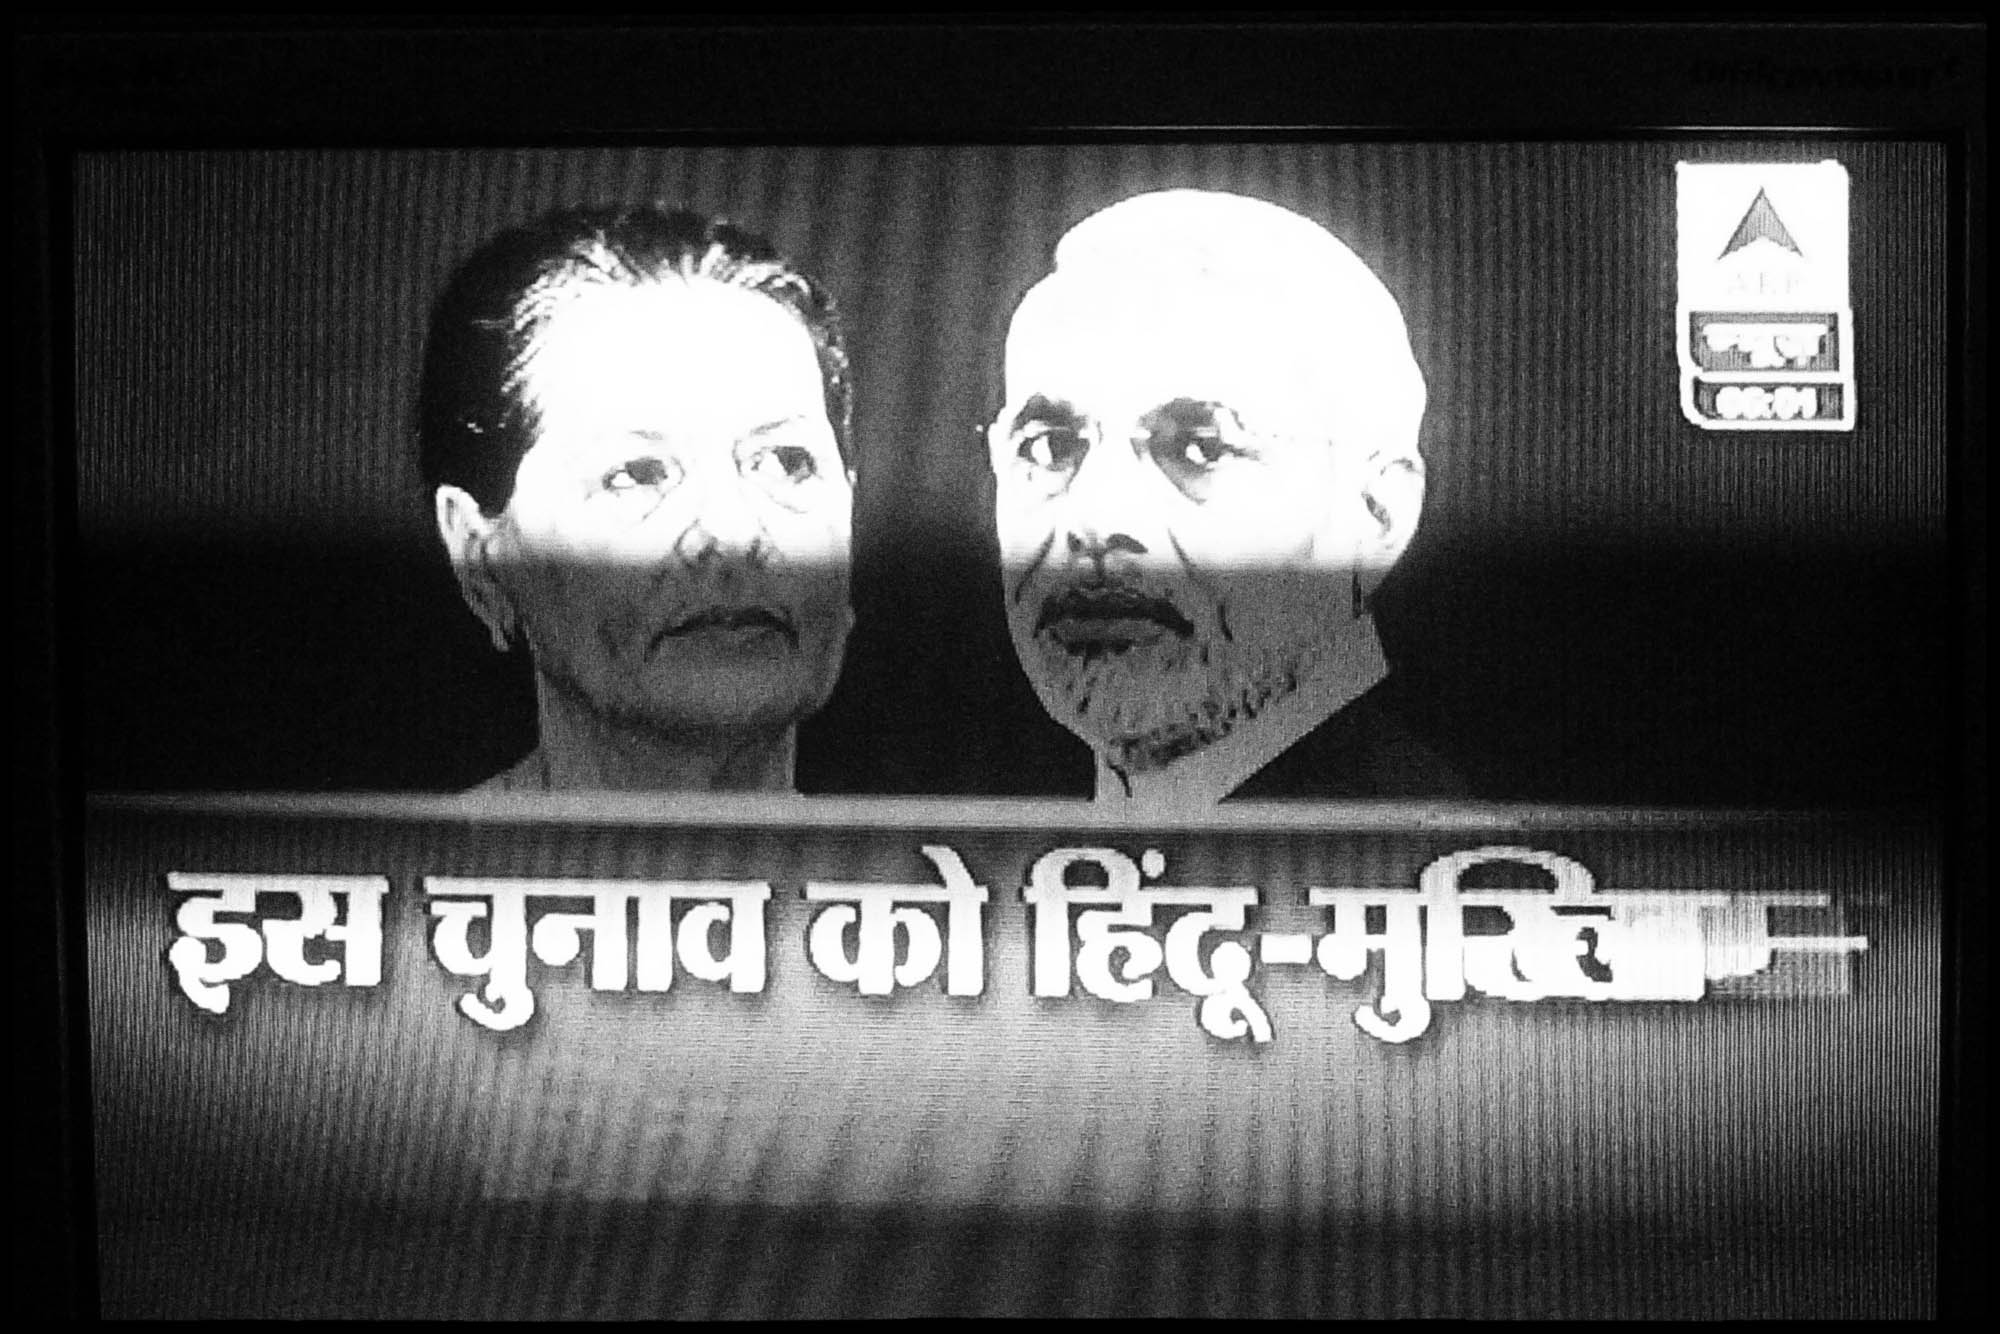 Breaking news on a television news channel in Kolkata ahead of the elections. The tag line written in Hindi reads: "Who made this election Hindu vs Muslim?"